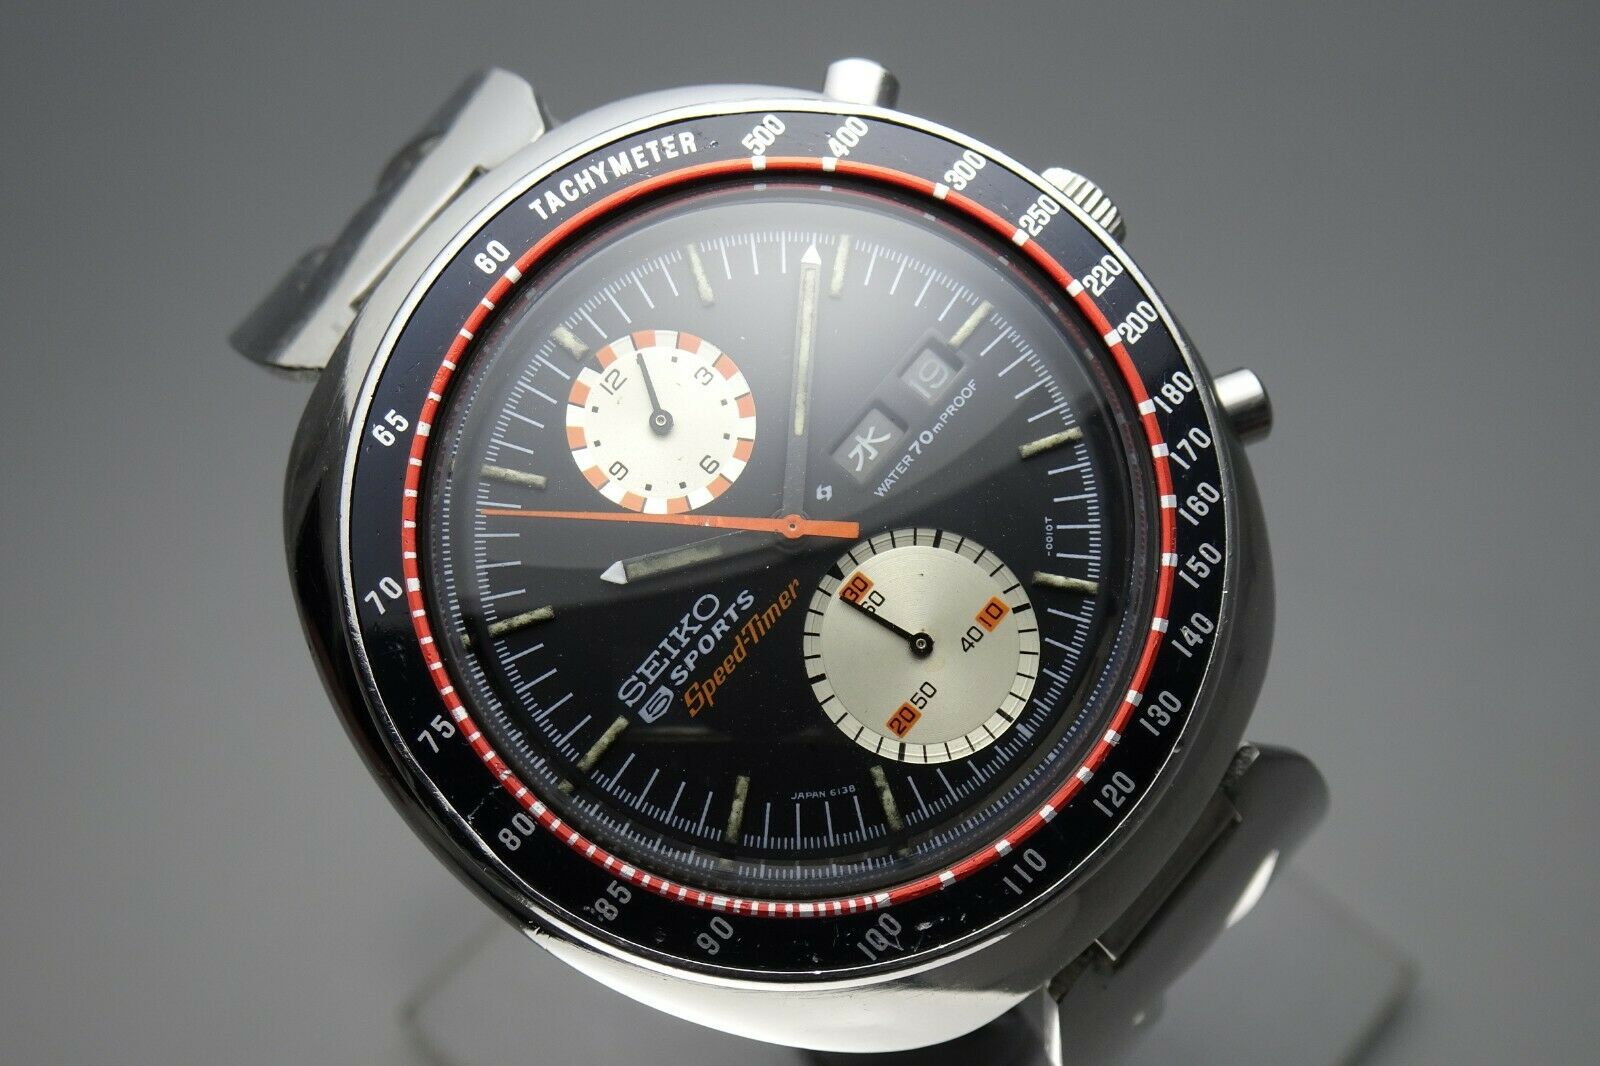 Seiko 6138 UFO / Yachtman Reference Guide | Vintage Watch Inc